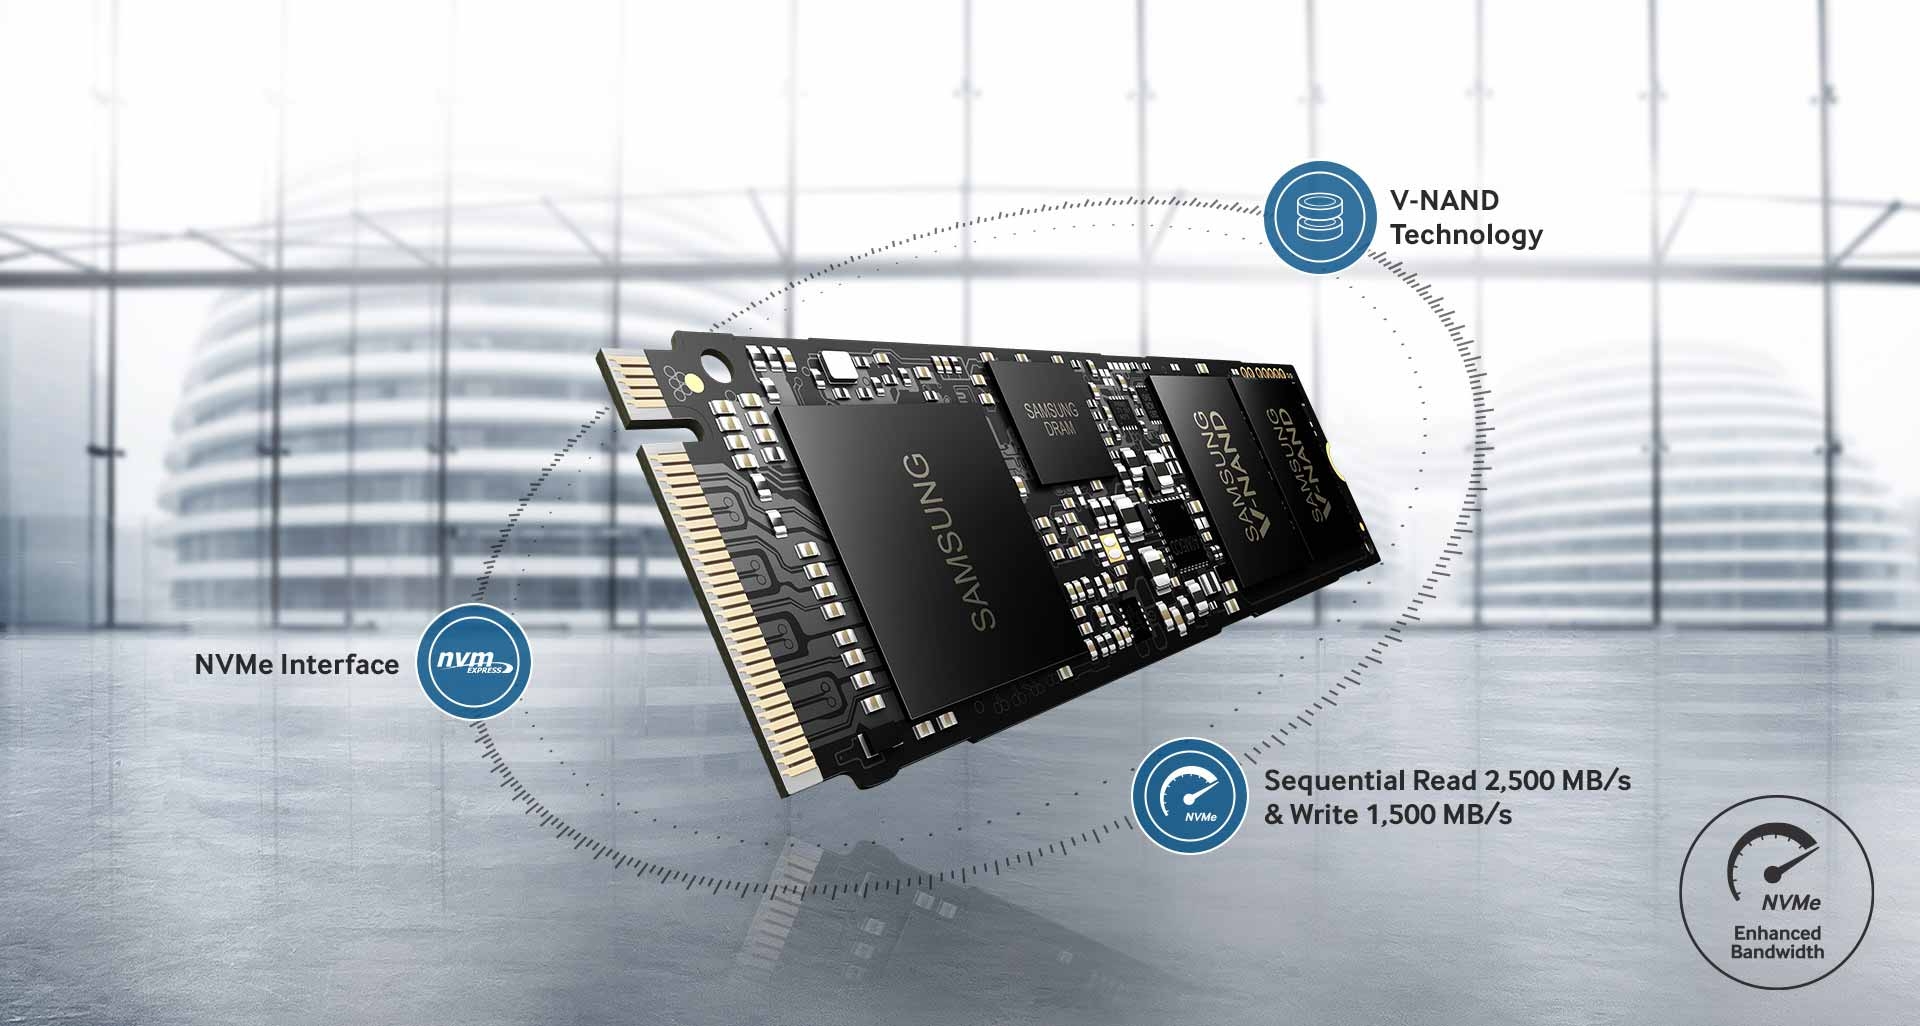 Experience a next-generation SSD today